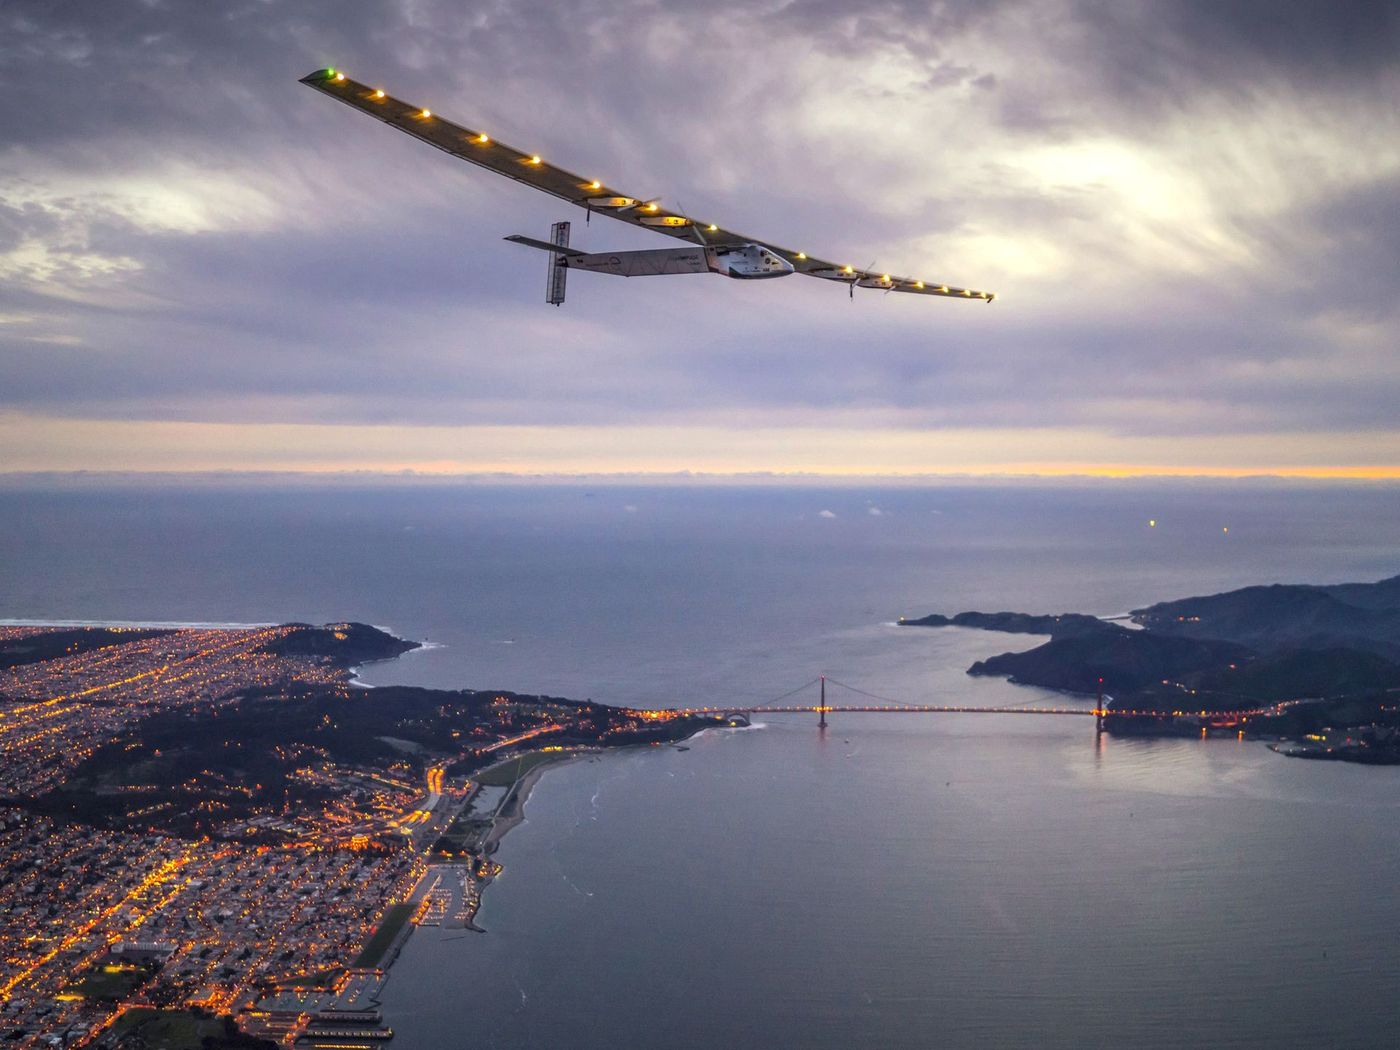 Solar Impulse 2 has completed its journey to New York City, and is now preparing to cross the Atlantic Ocean on nothing more than solar power.